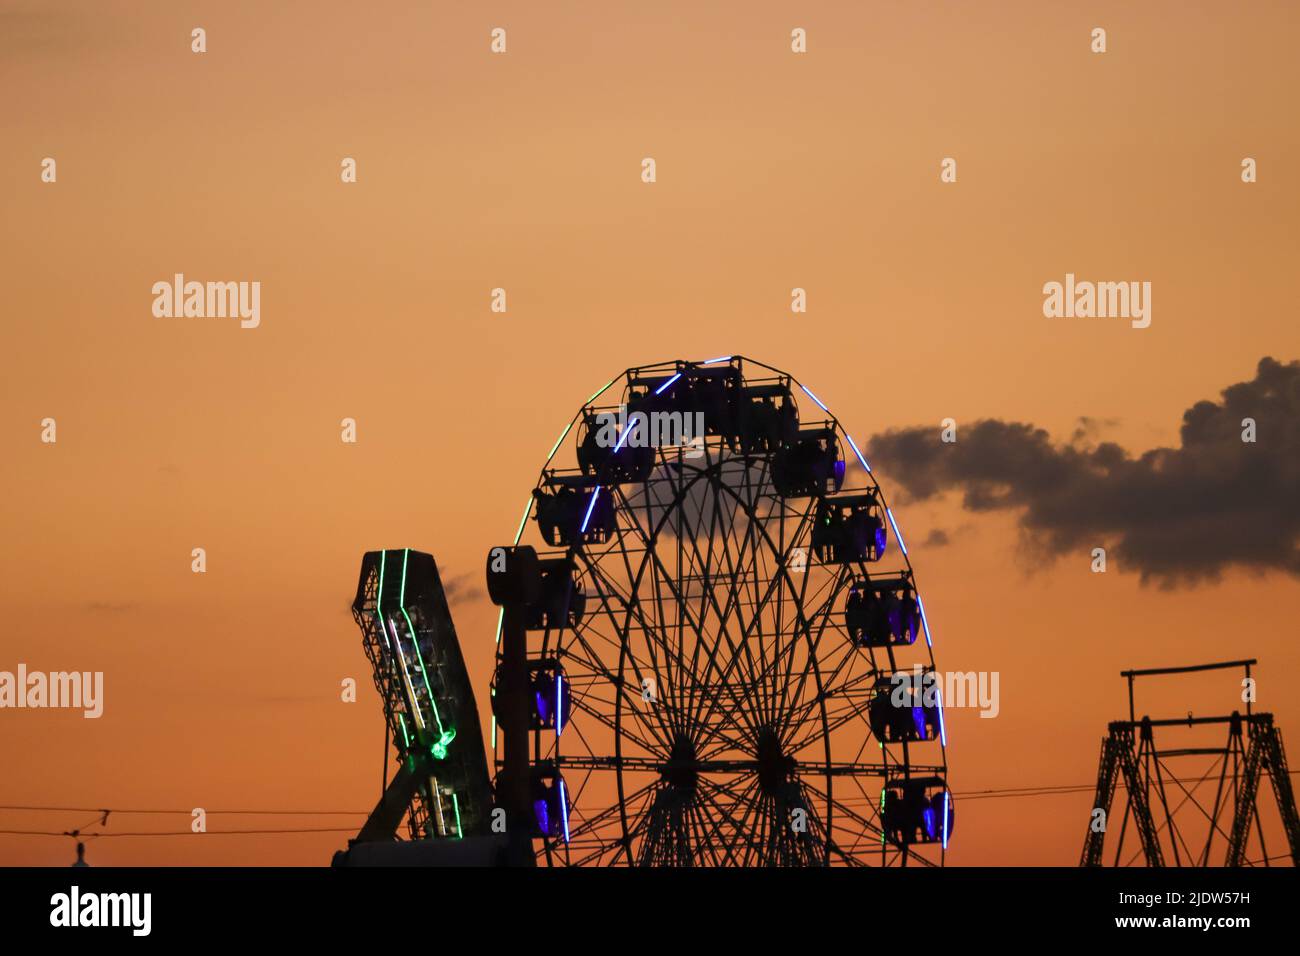 Ferris wheel in evening time with orange environment. Stock Photo